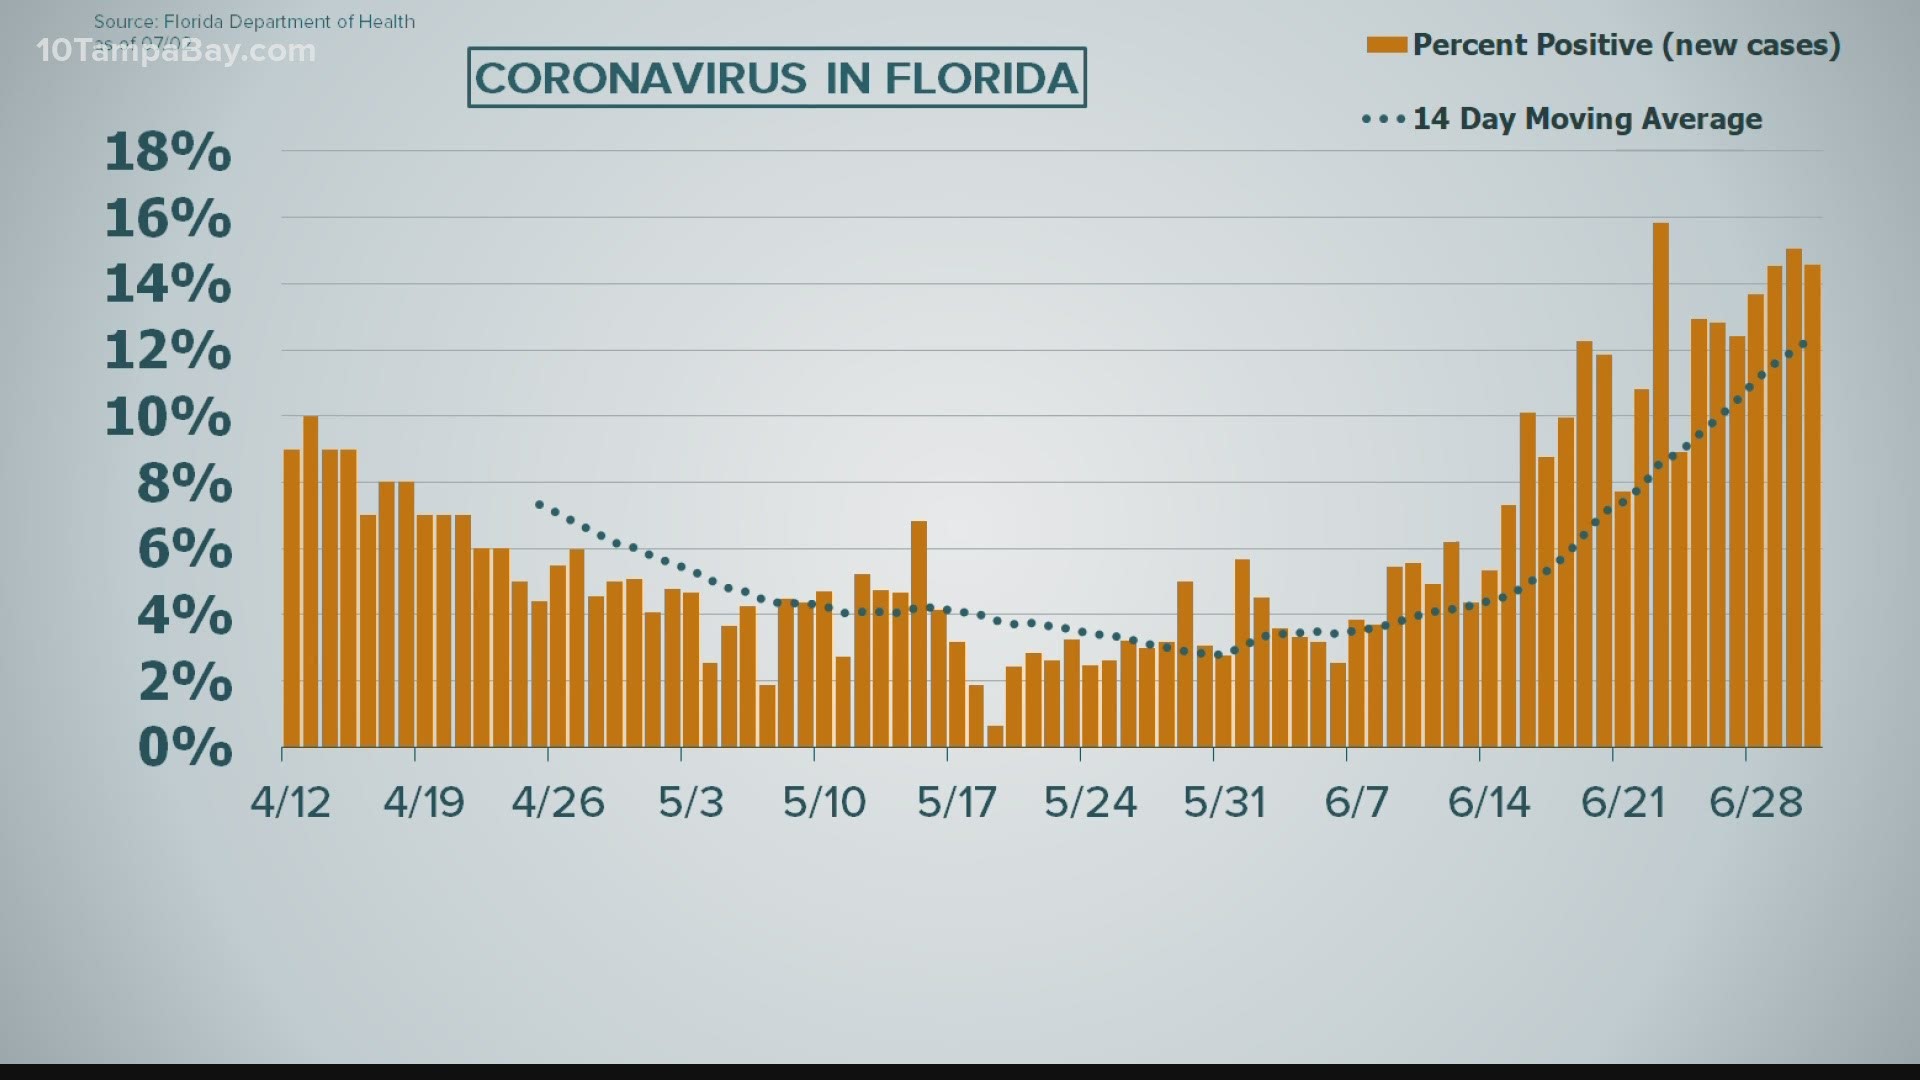 The state of Florida has reported more than 169,000 cases of COVID-19 since March.